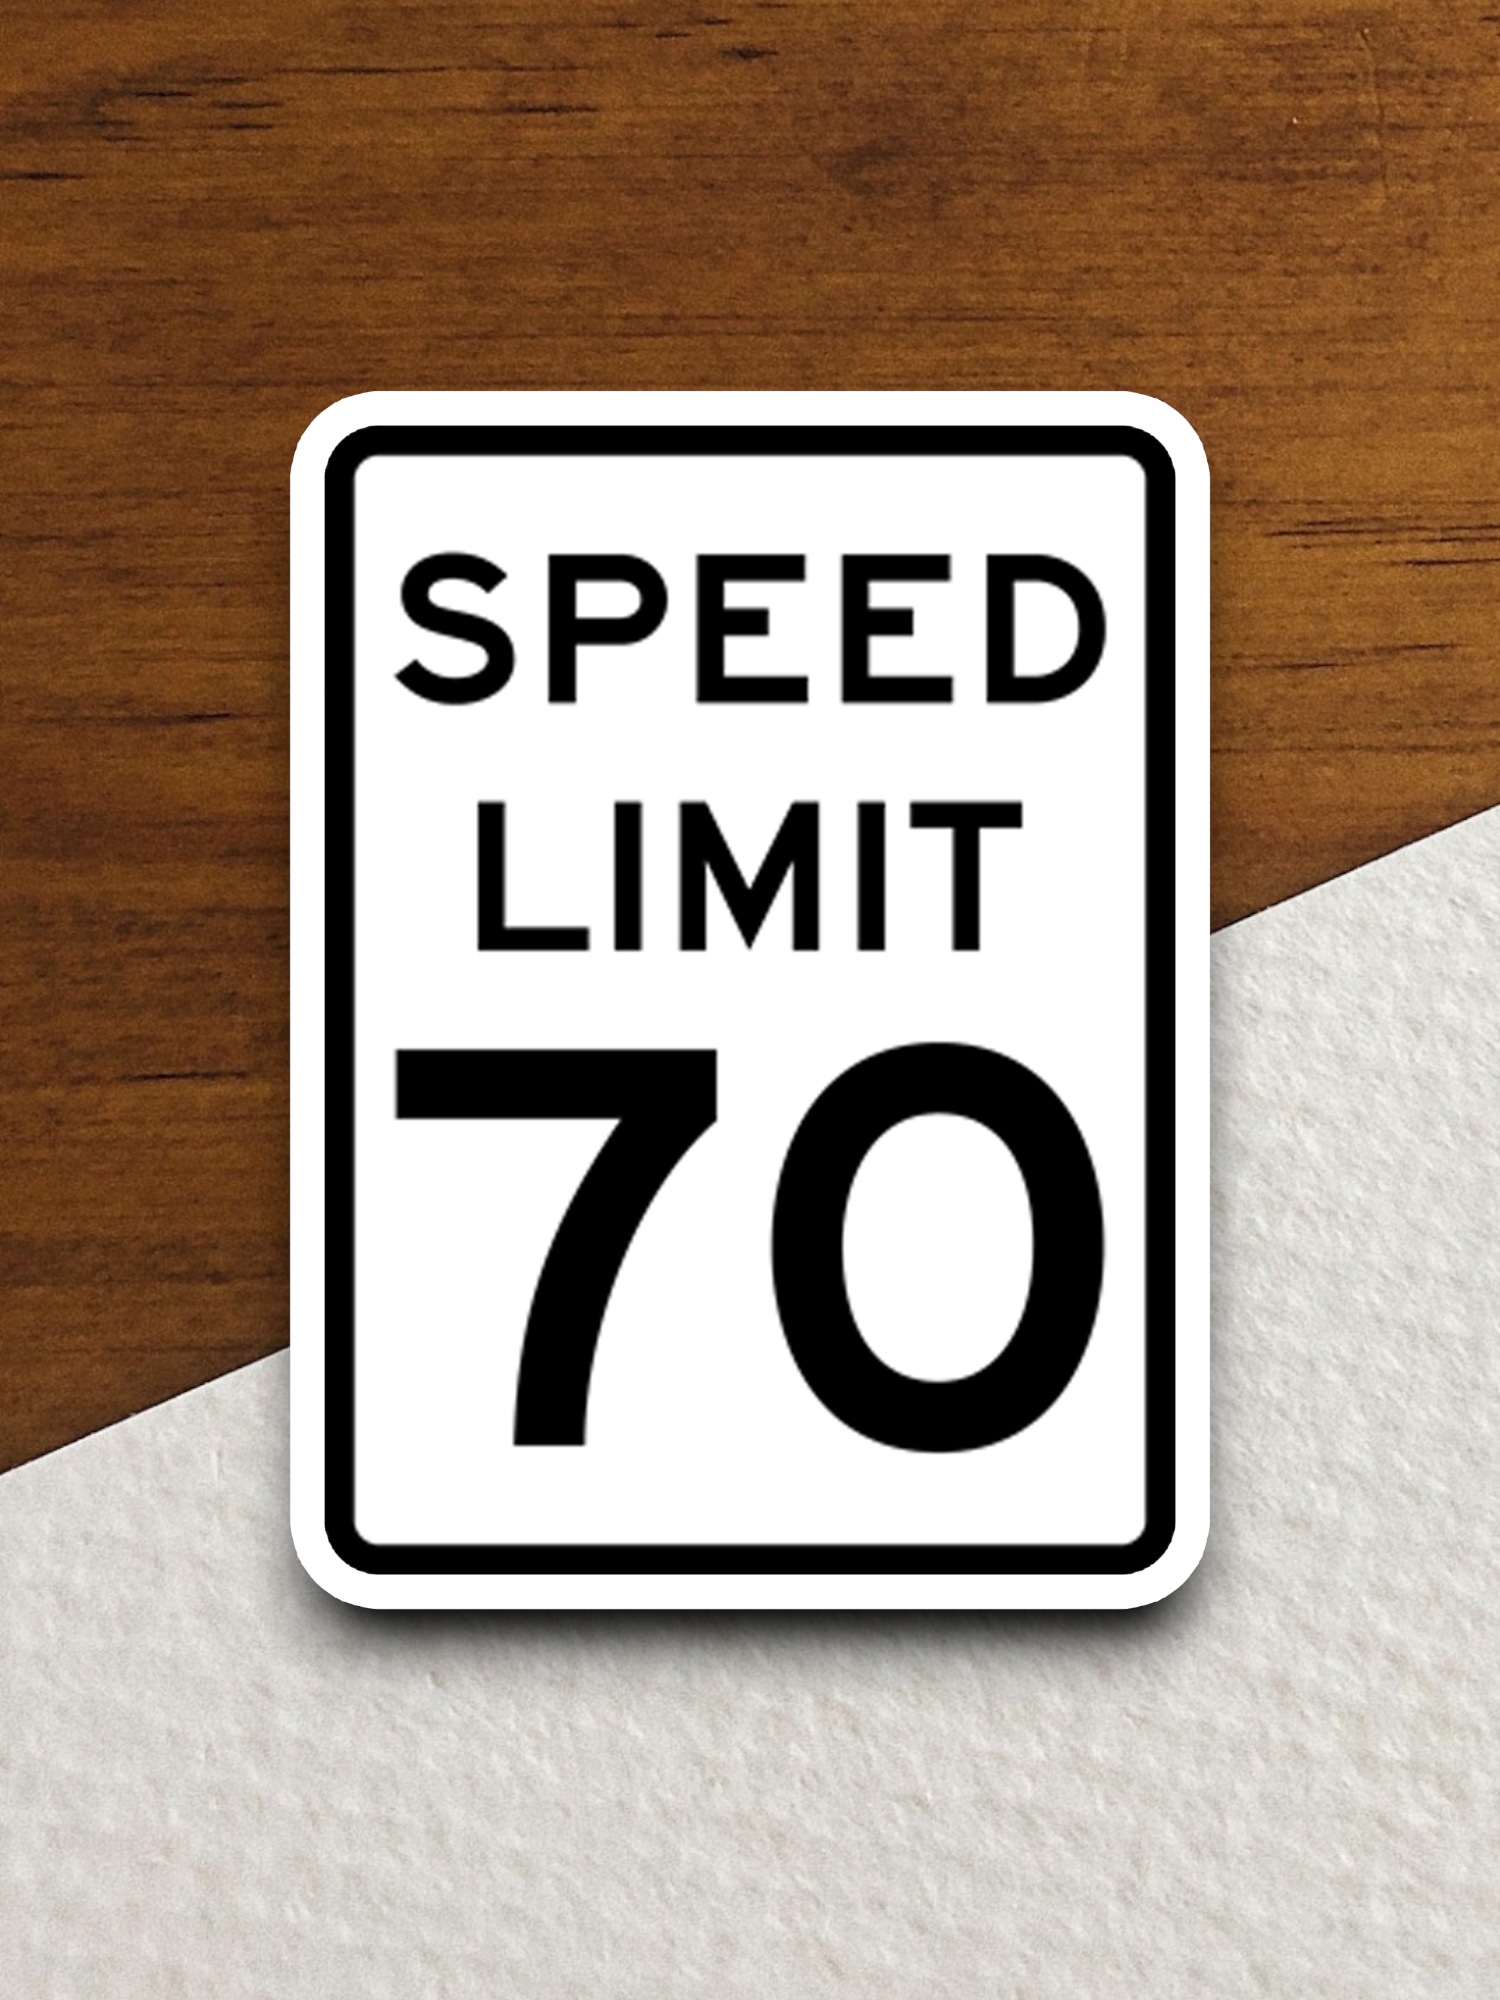 70 Miles Per Hour Speed Limit Road Sign Sticker